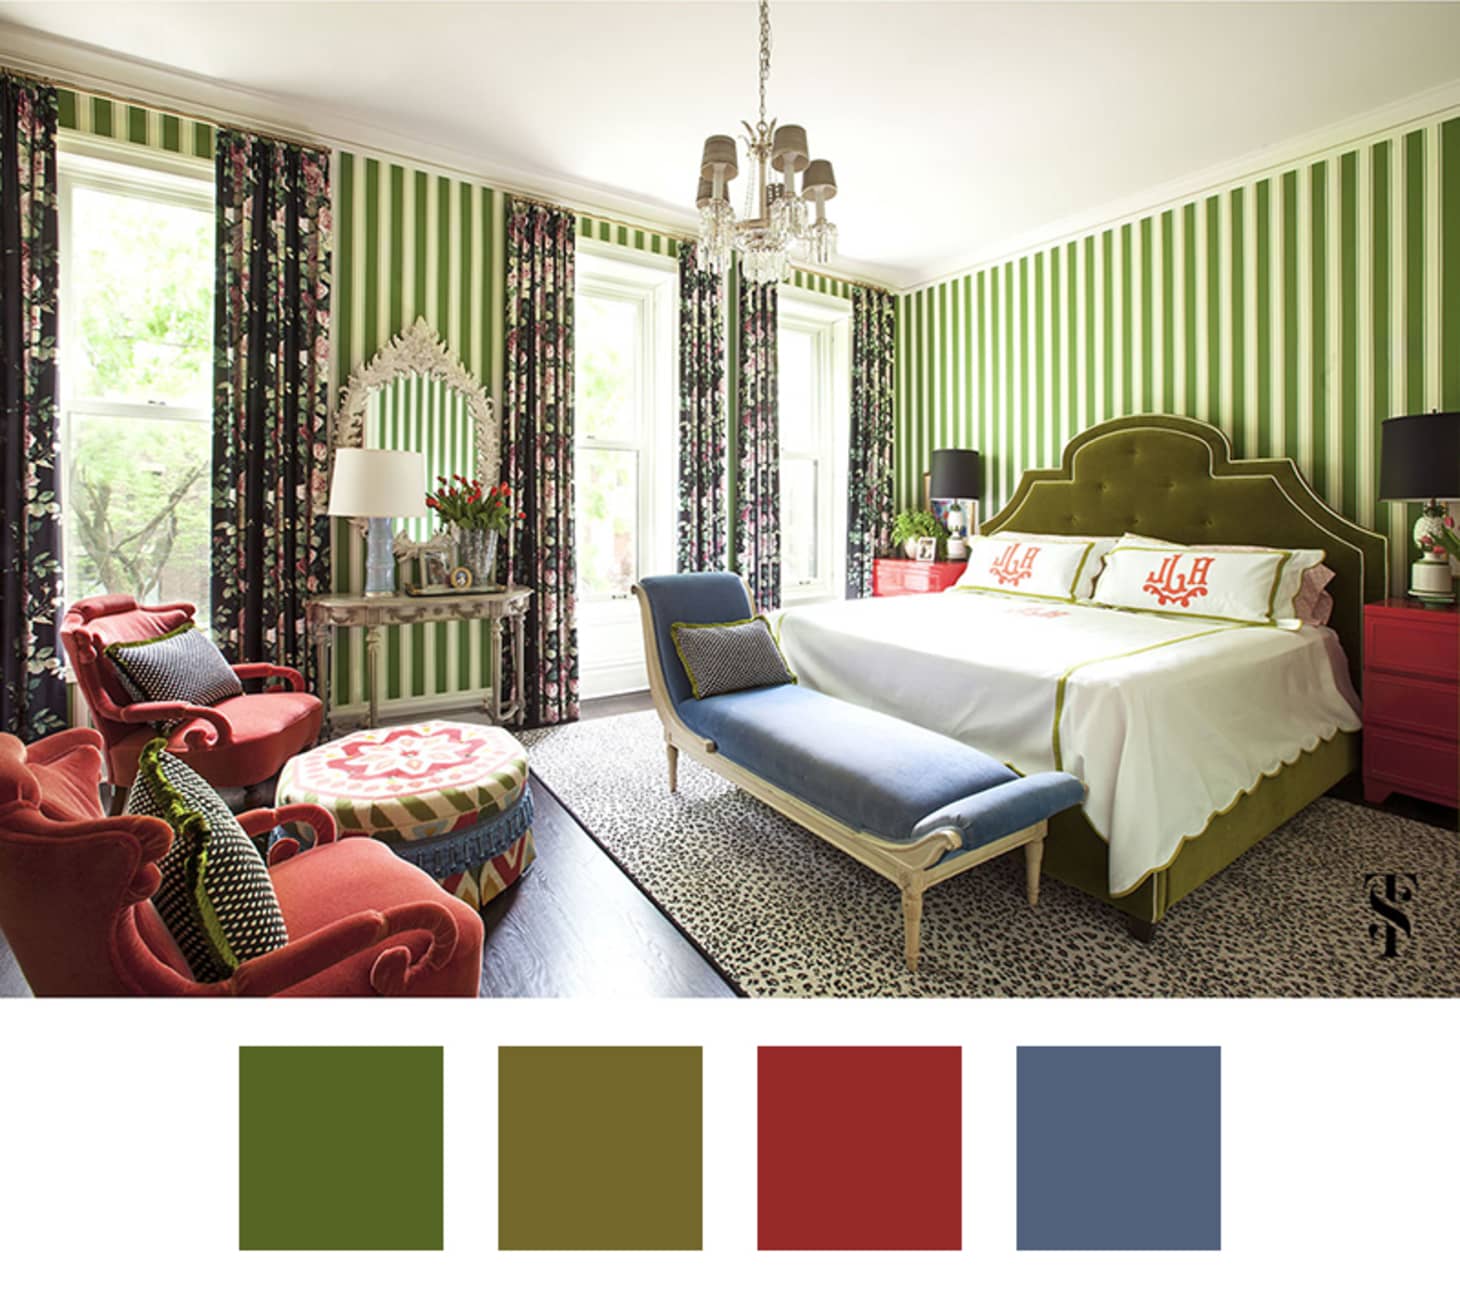 Green And Red Bedroom By Summer Thornton Design